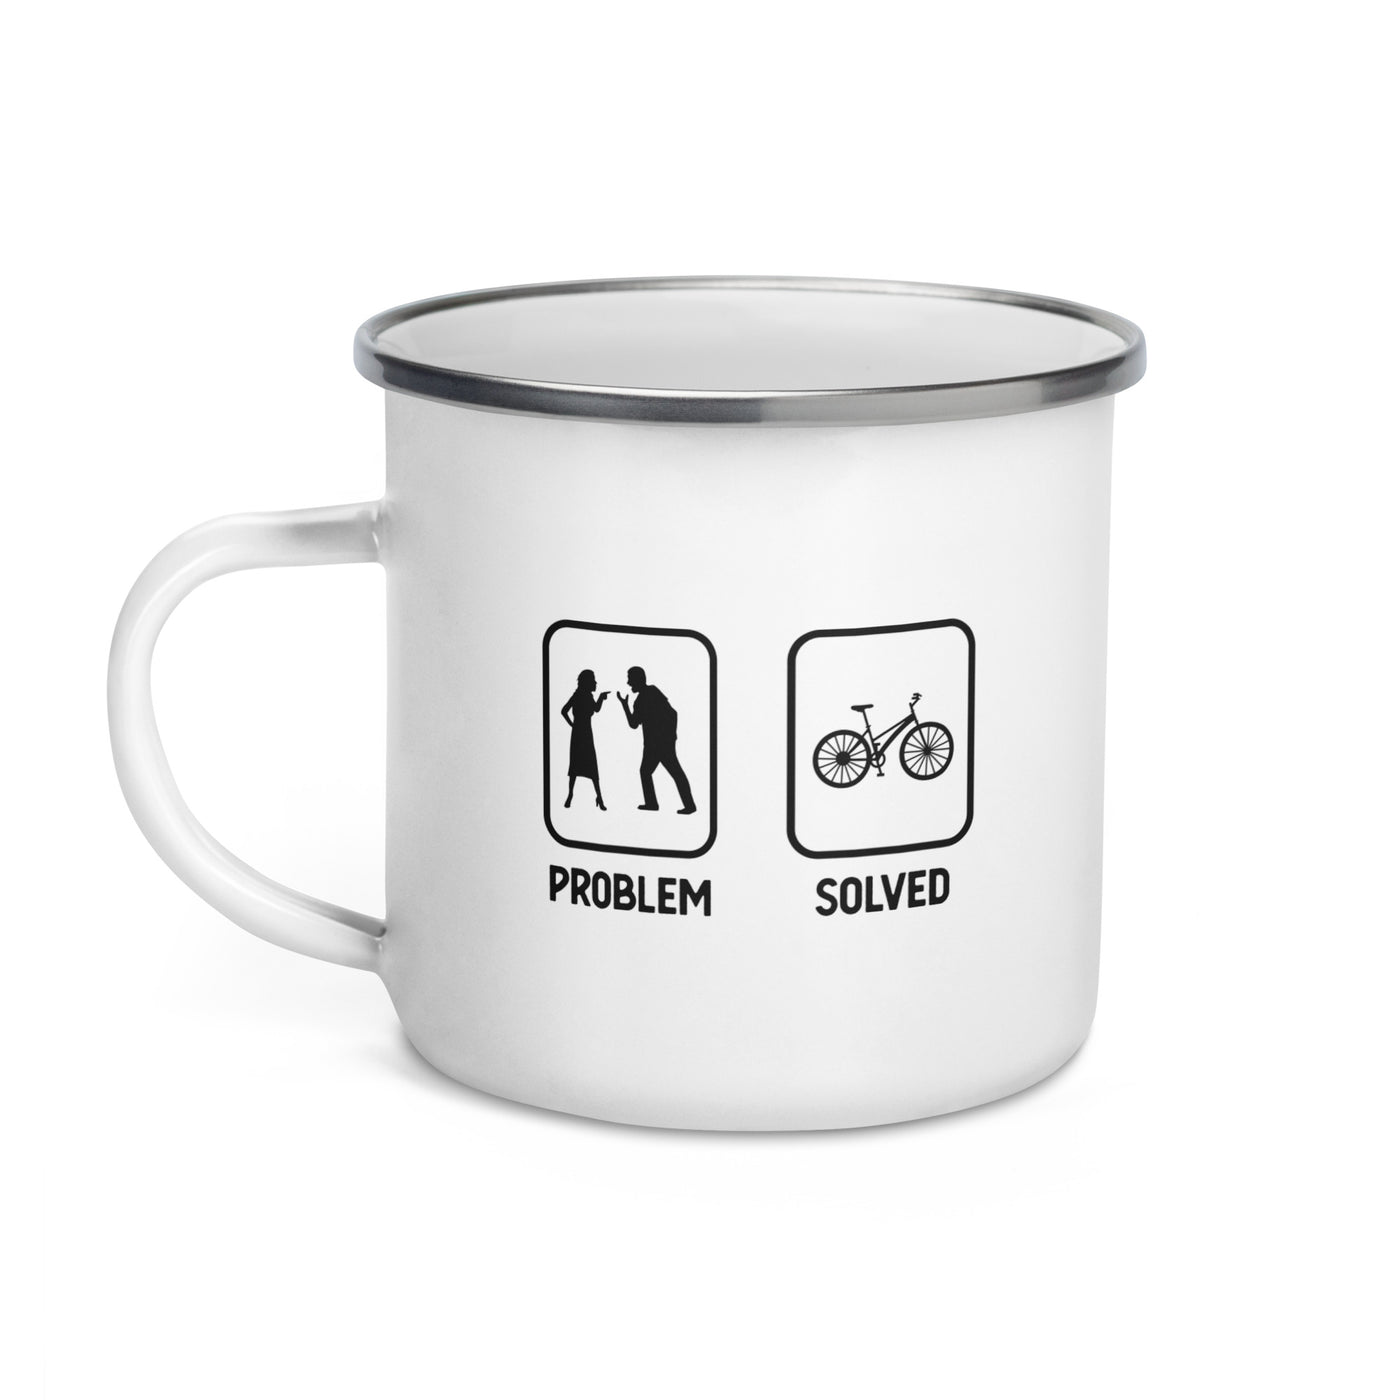 Problem Solved - Cycling - Emaille Tasse fahrrad